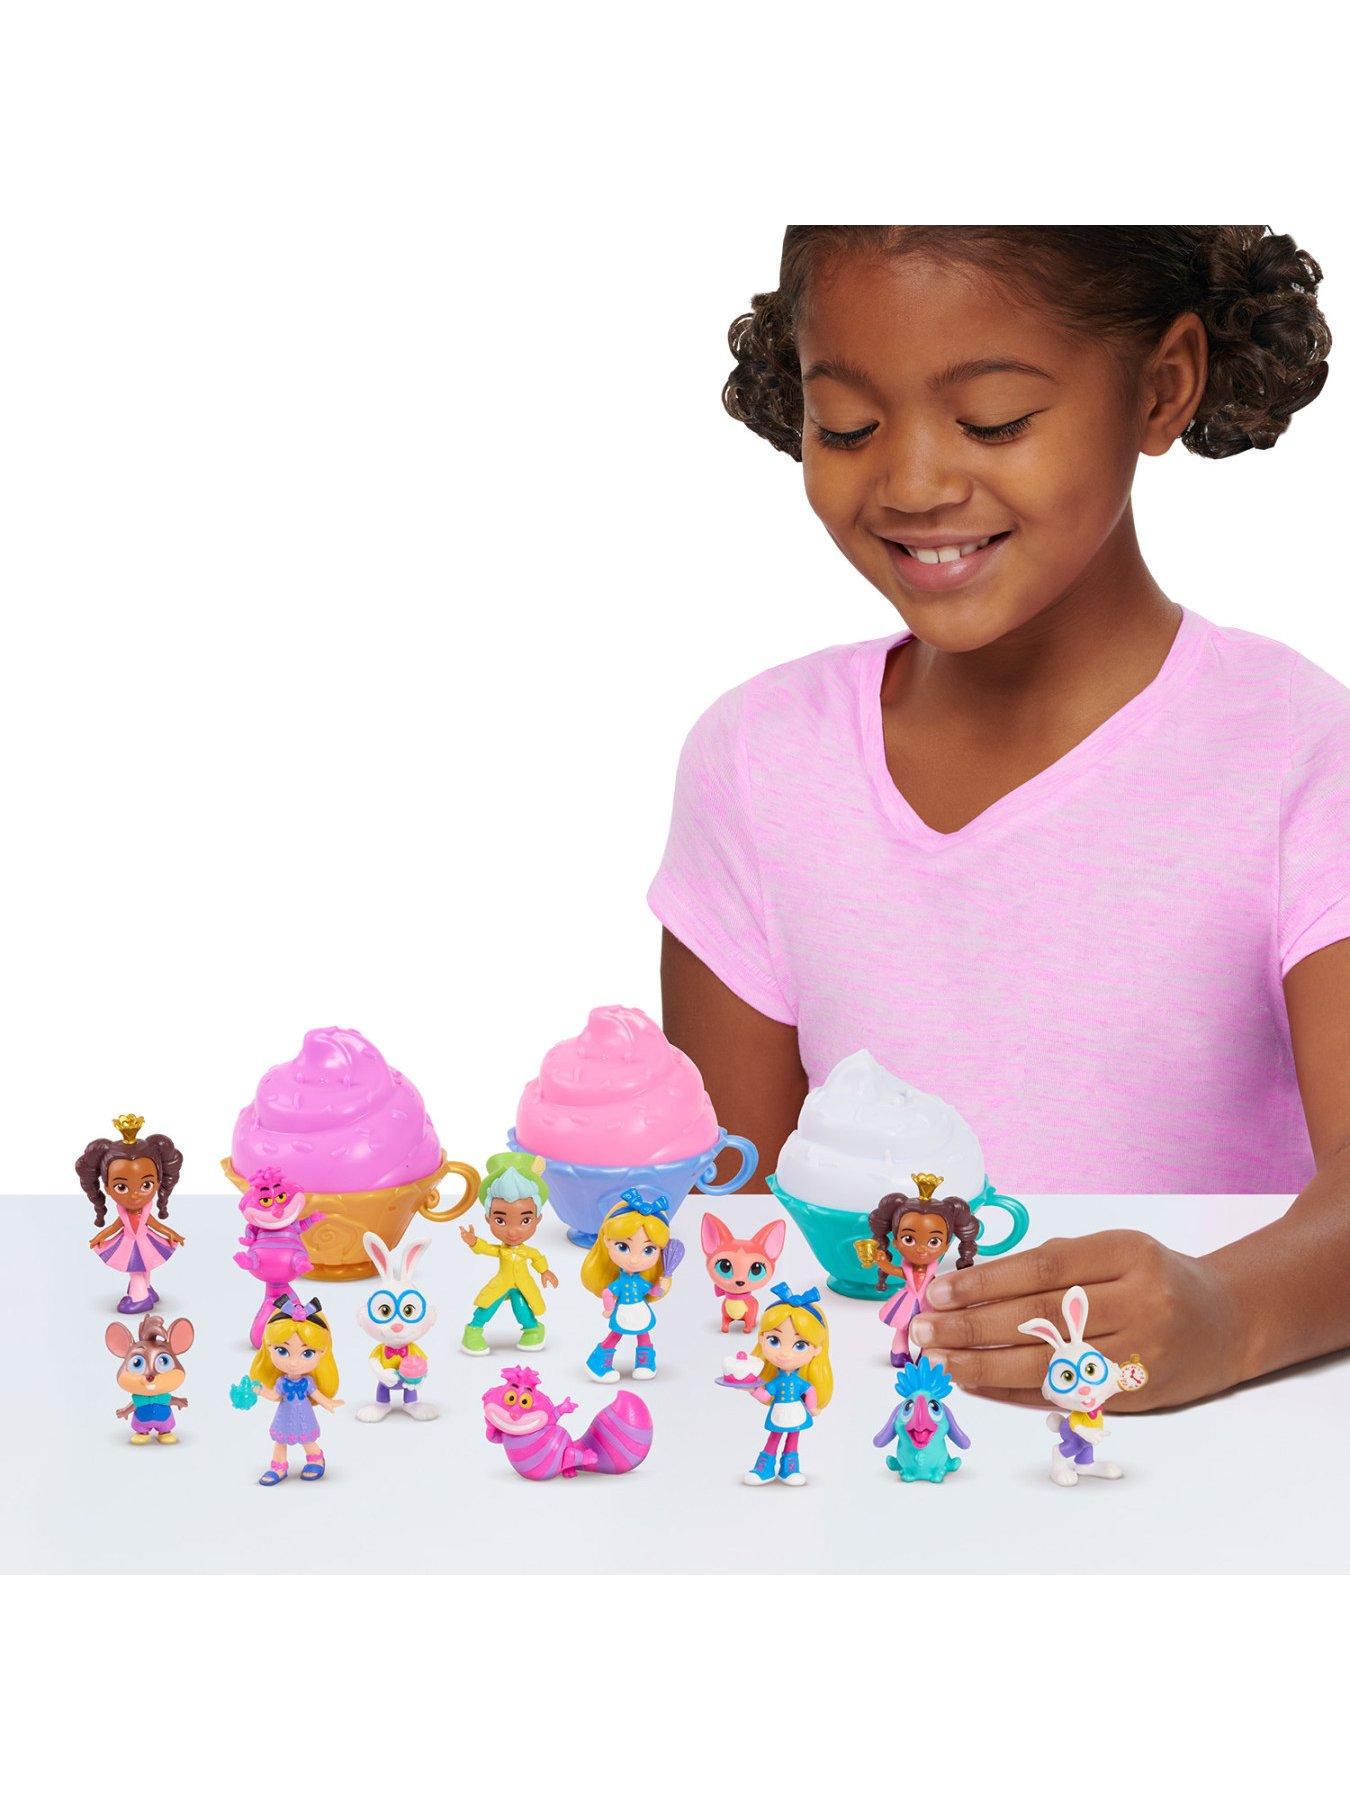 Disney Junior Alices Wonderland Bakery Rosa Doll and Accessories, Kids Toys for Ages 3 Up, Size: 7.0 inches; 4.0 inches; 12.0 Inches